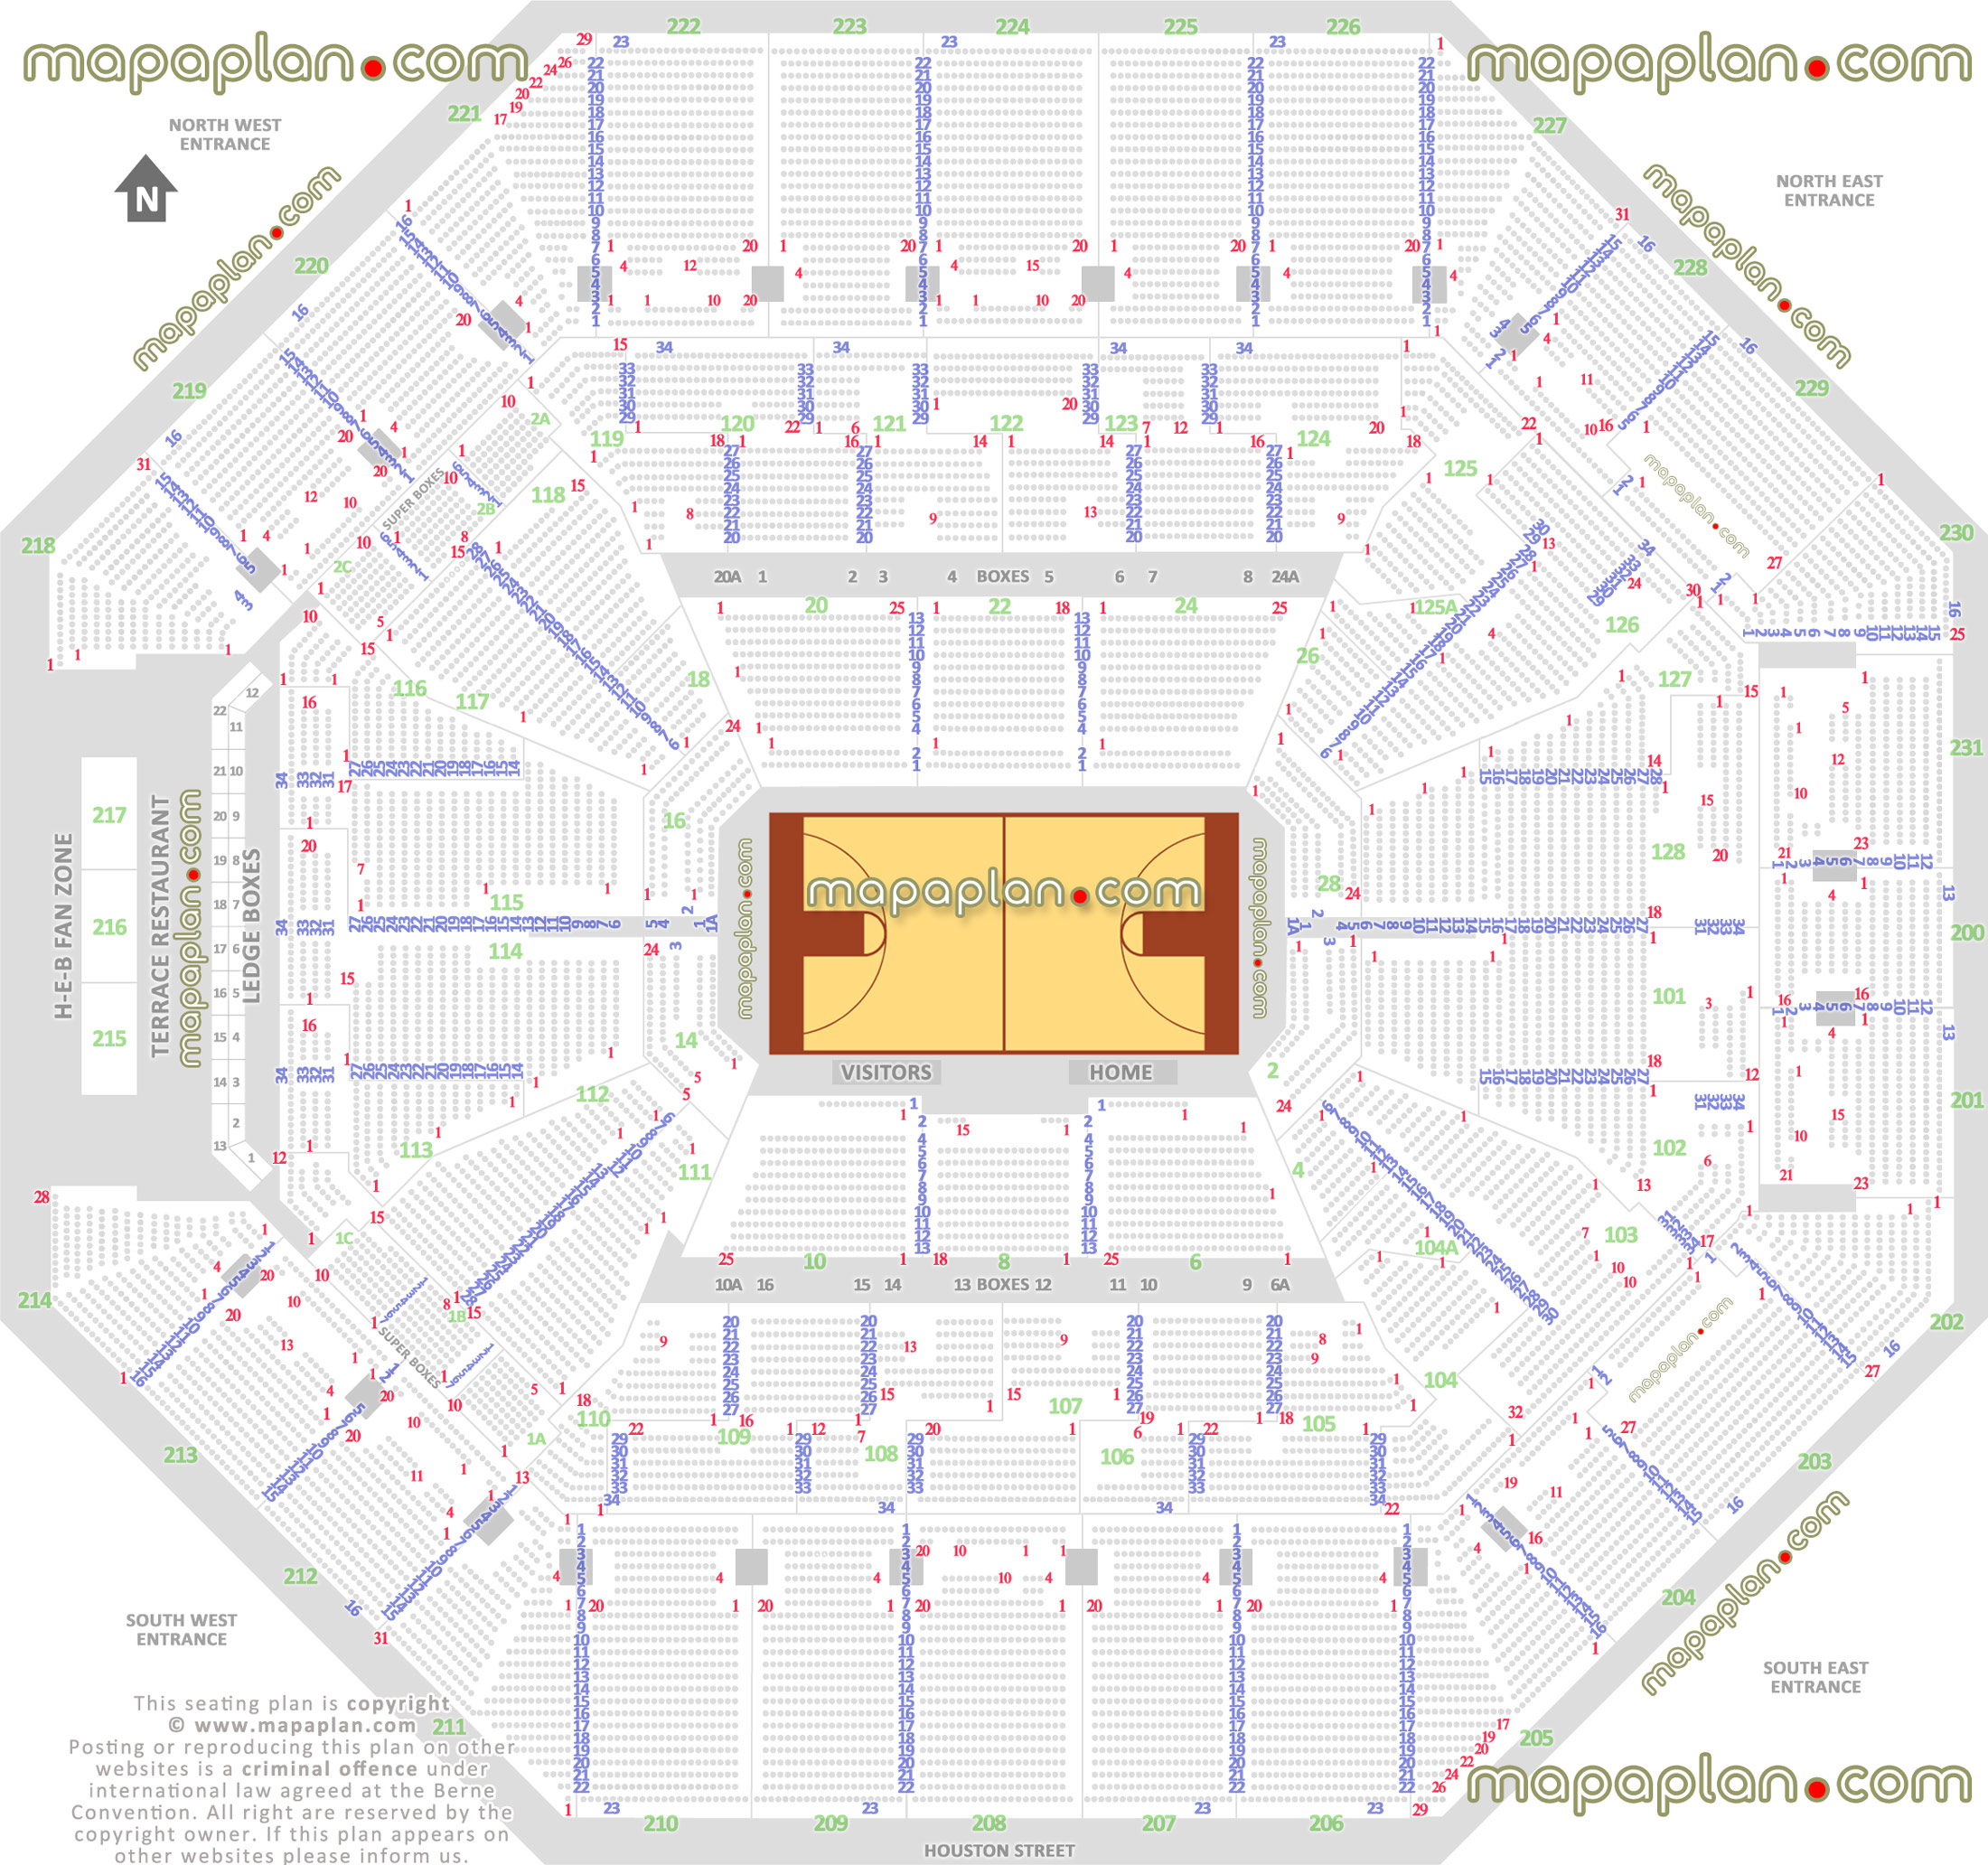 san antonio spurs basketball game arena stadium diagram individual find seat locator how many seats row how seats rows numbered courtside sections 2 4 6 8 10 12 14 16 18 20 22 24 26 28 San Antonio AT&T Center seating chart